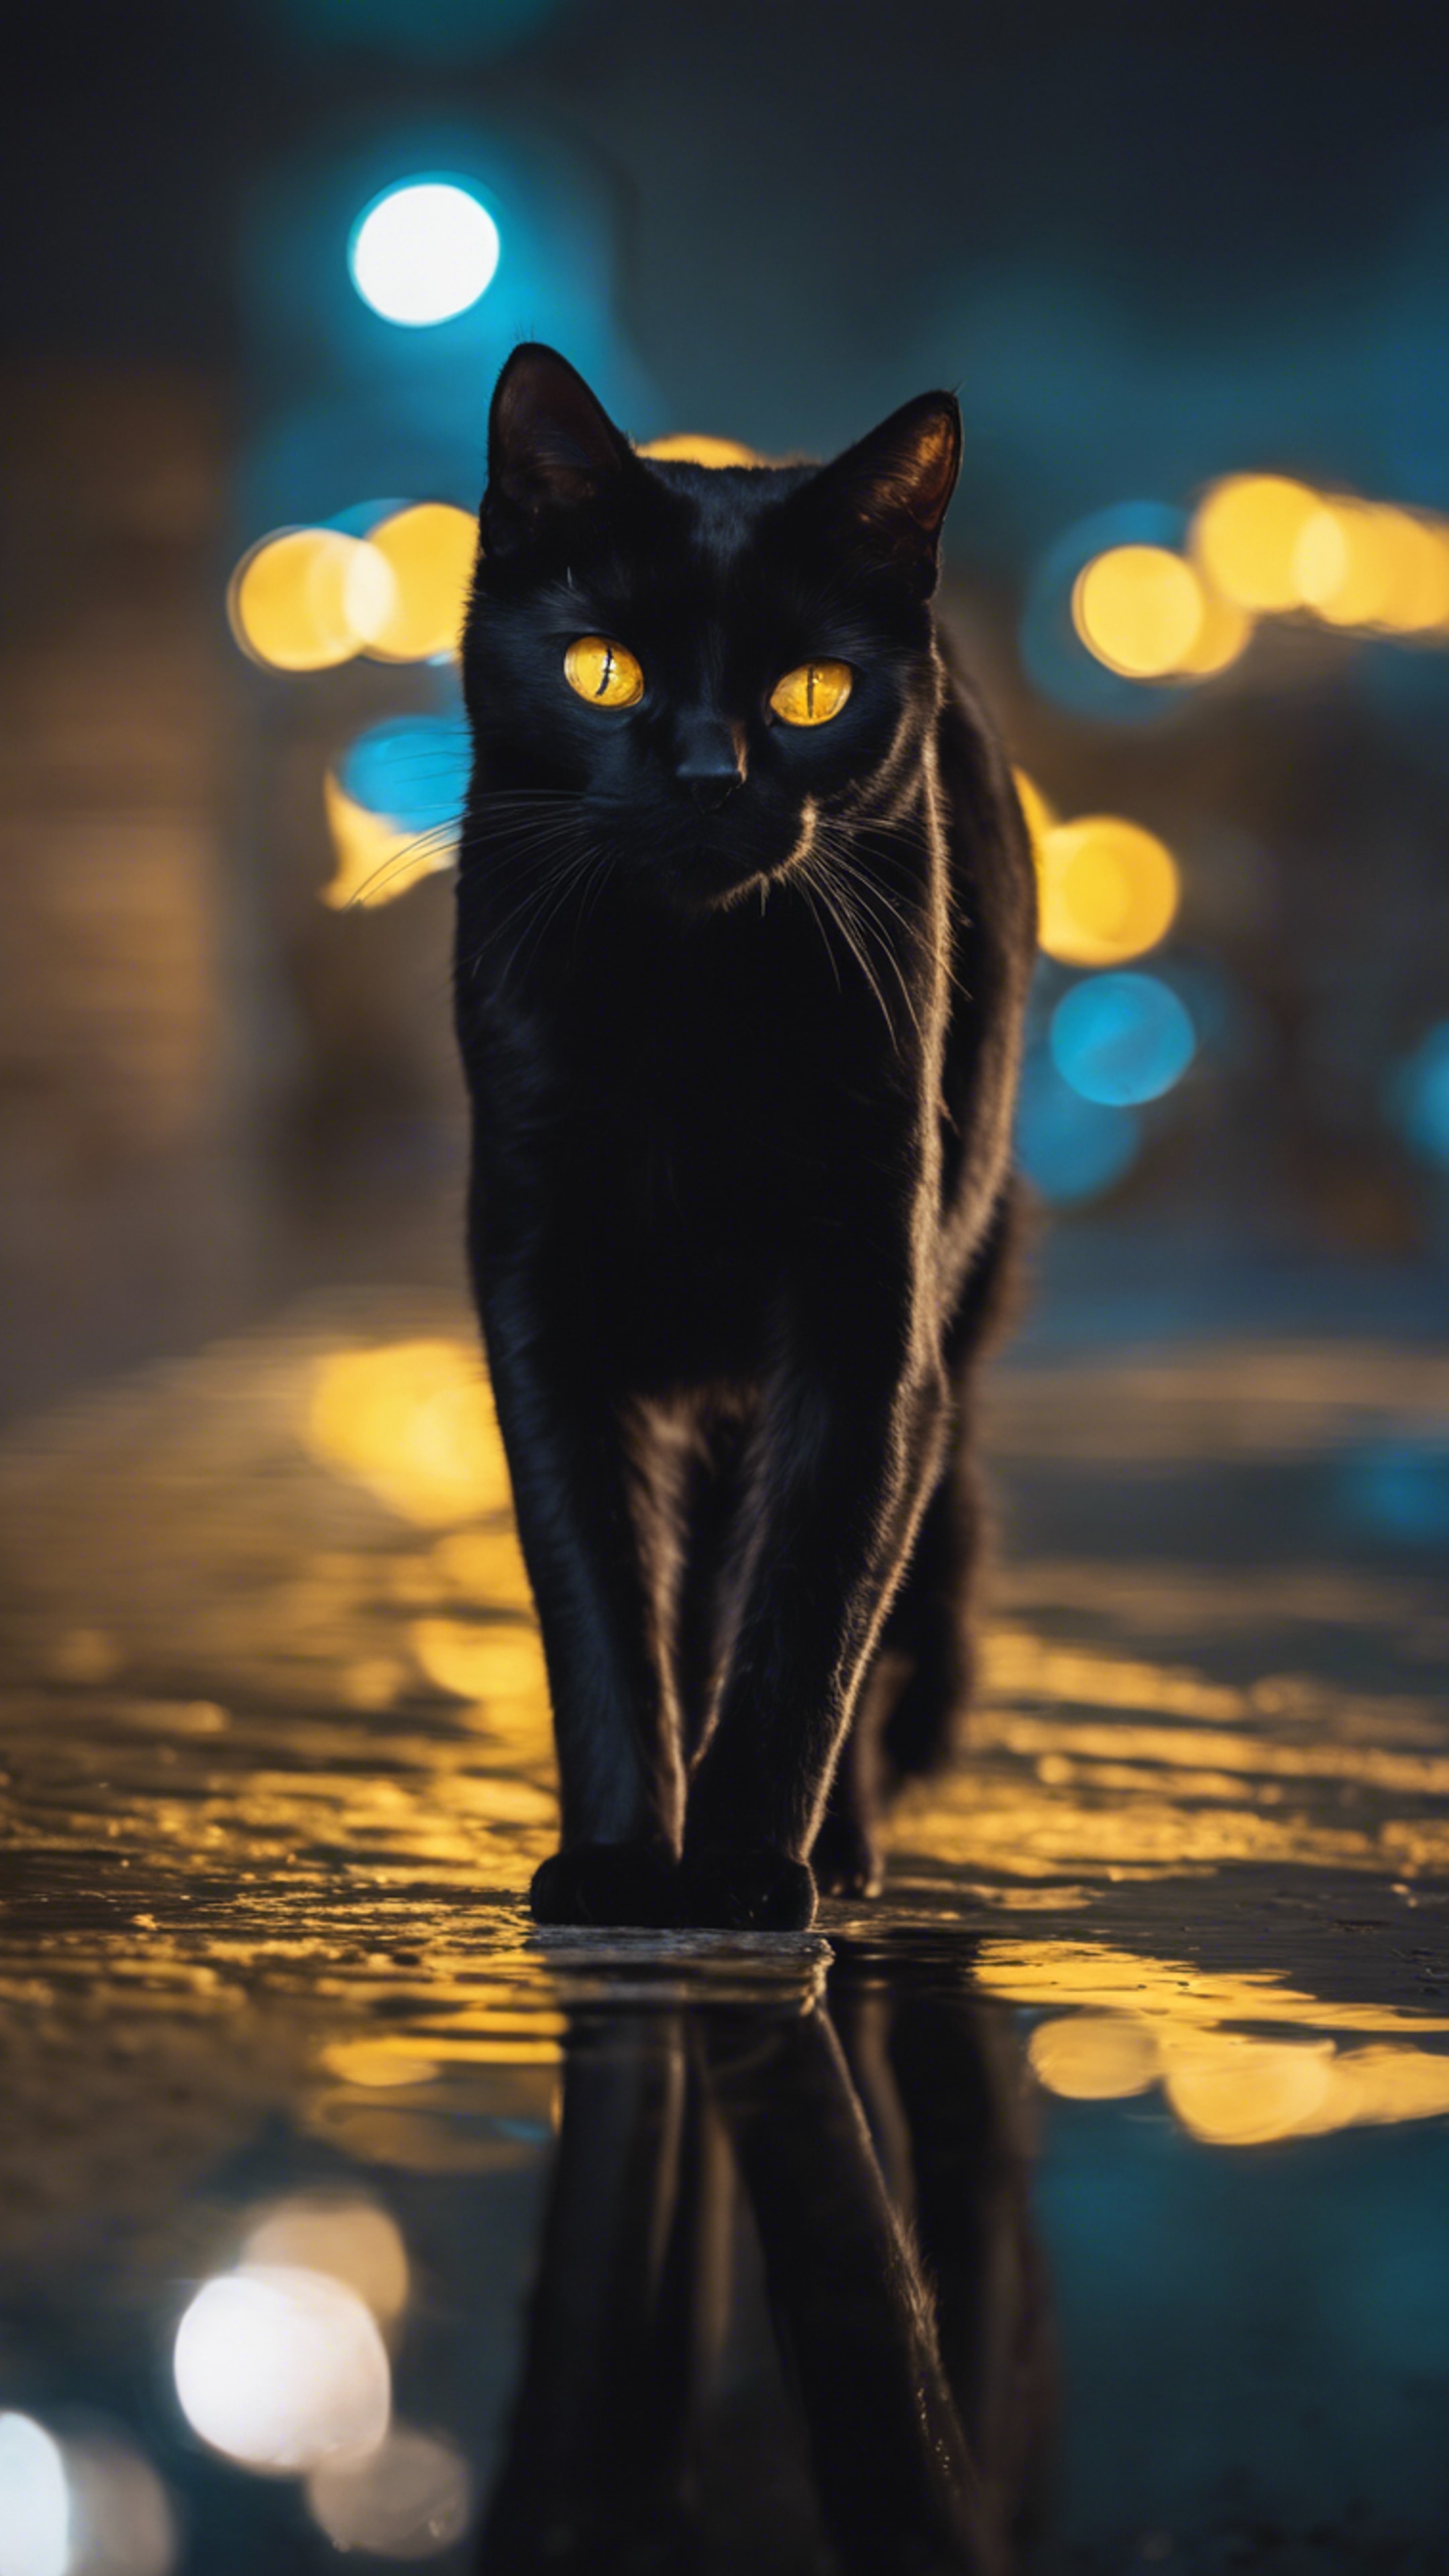 A black cat with glowing yellow eyes silently stalking its prey at midnight.壁紙[8a2292937a0b4ec489d2]